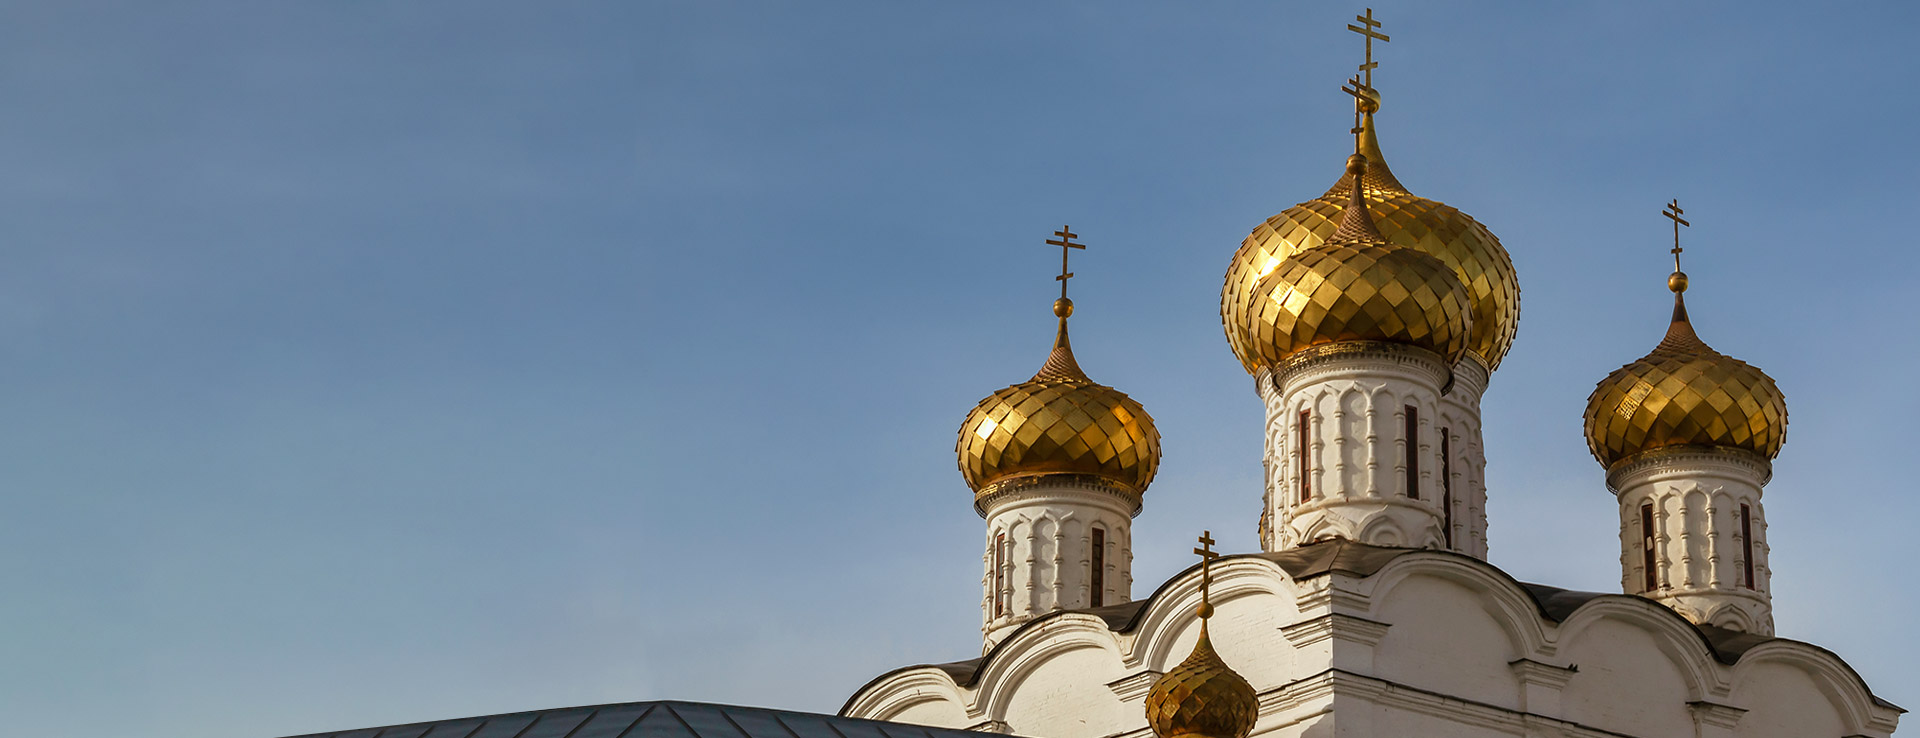 Ipatievsky Monastery in Kostroma, Russia, with golden onion-domed towers